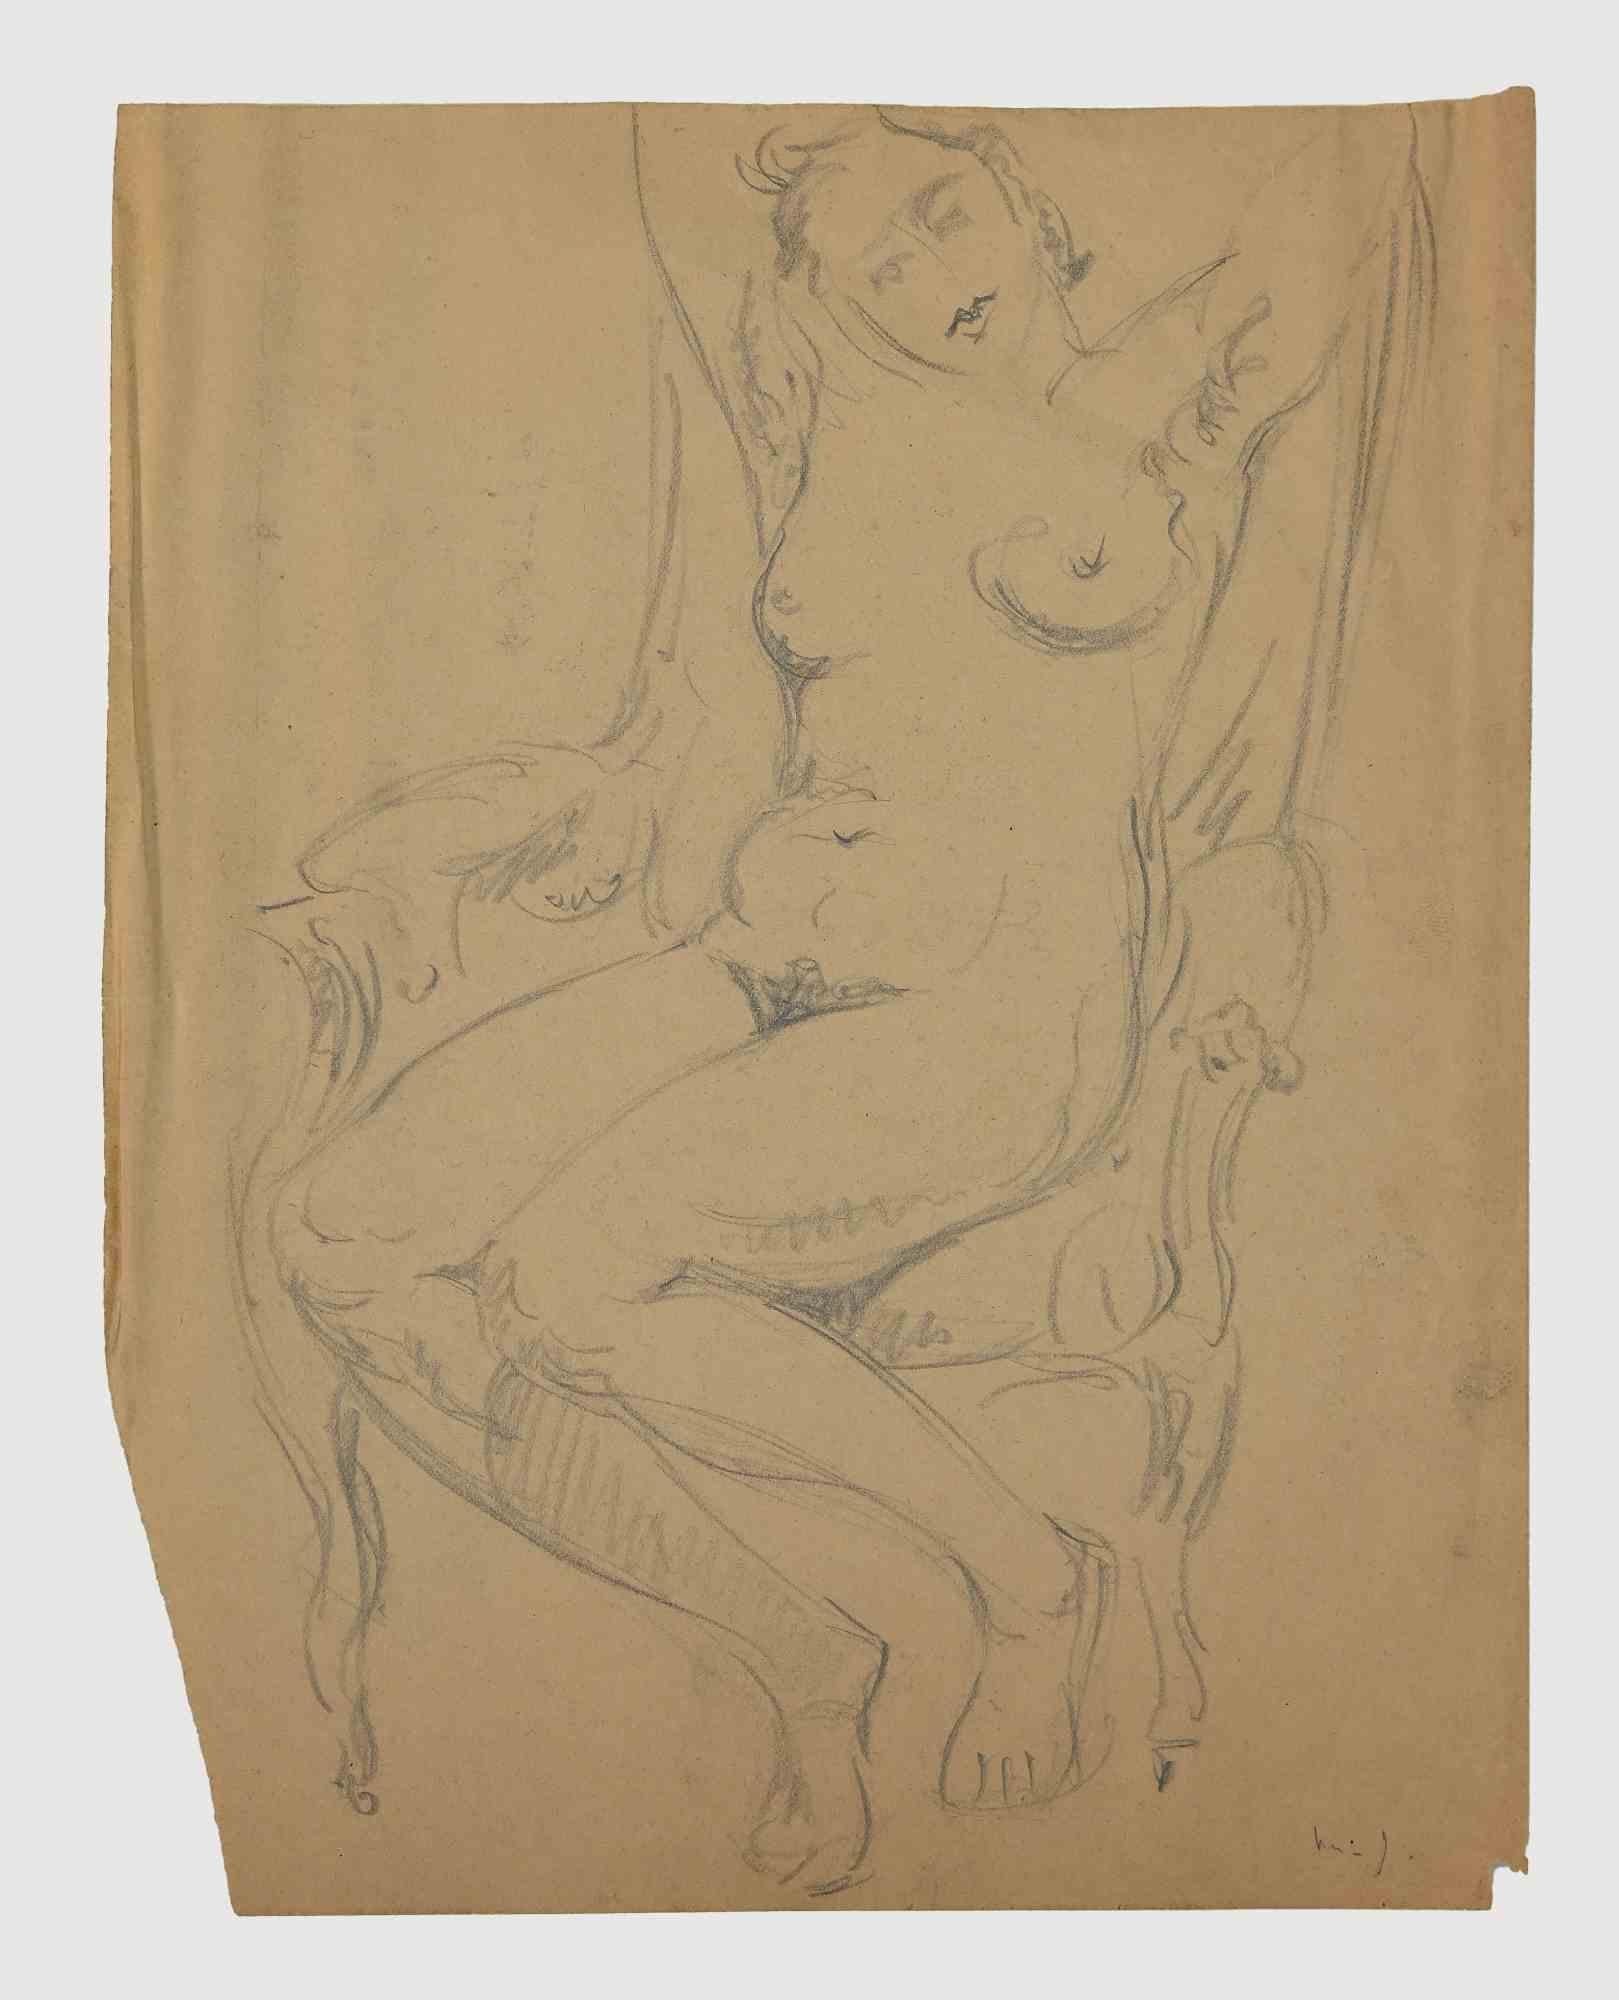 Unknown Figurative Art - Nude - Original Drawing - Early 20th Century